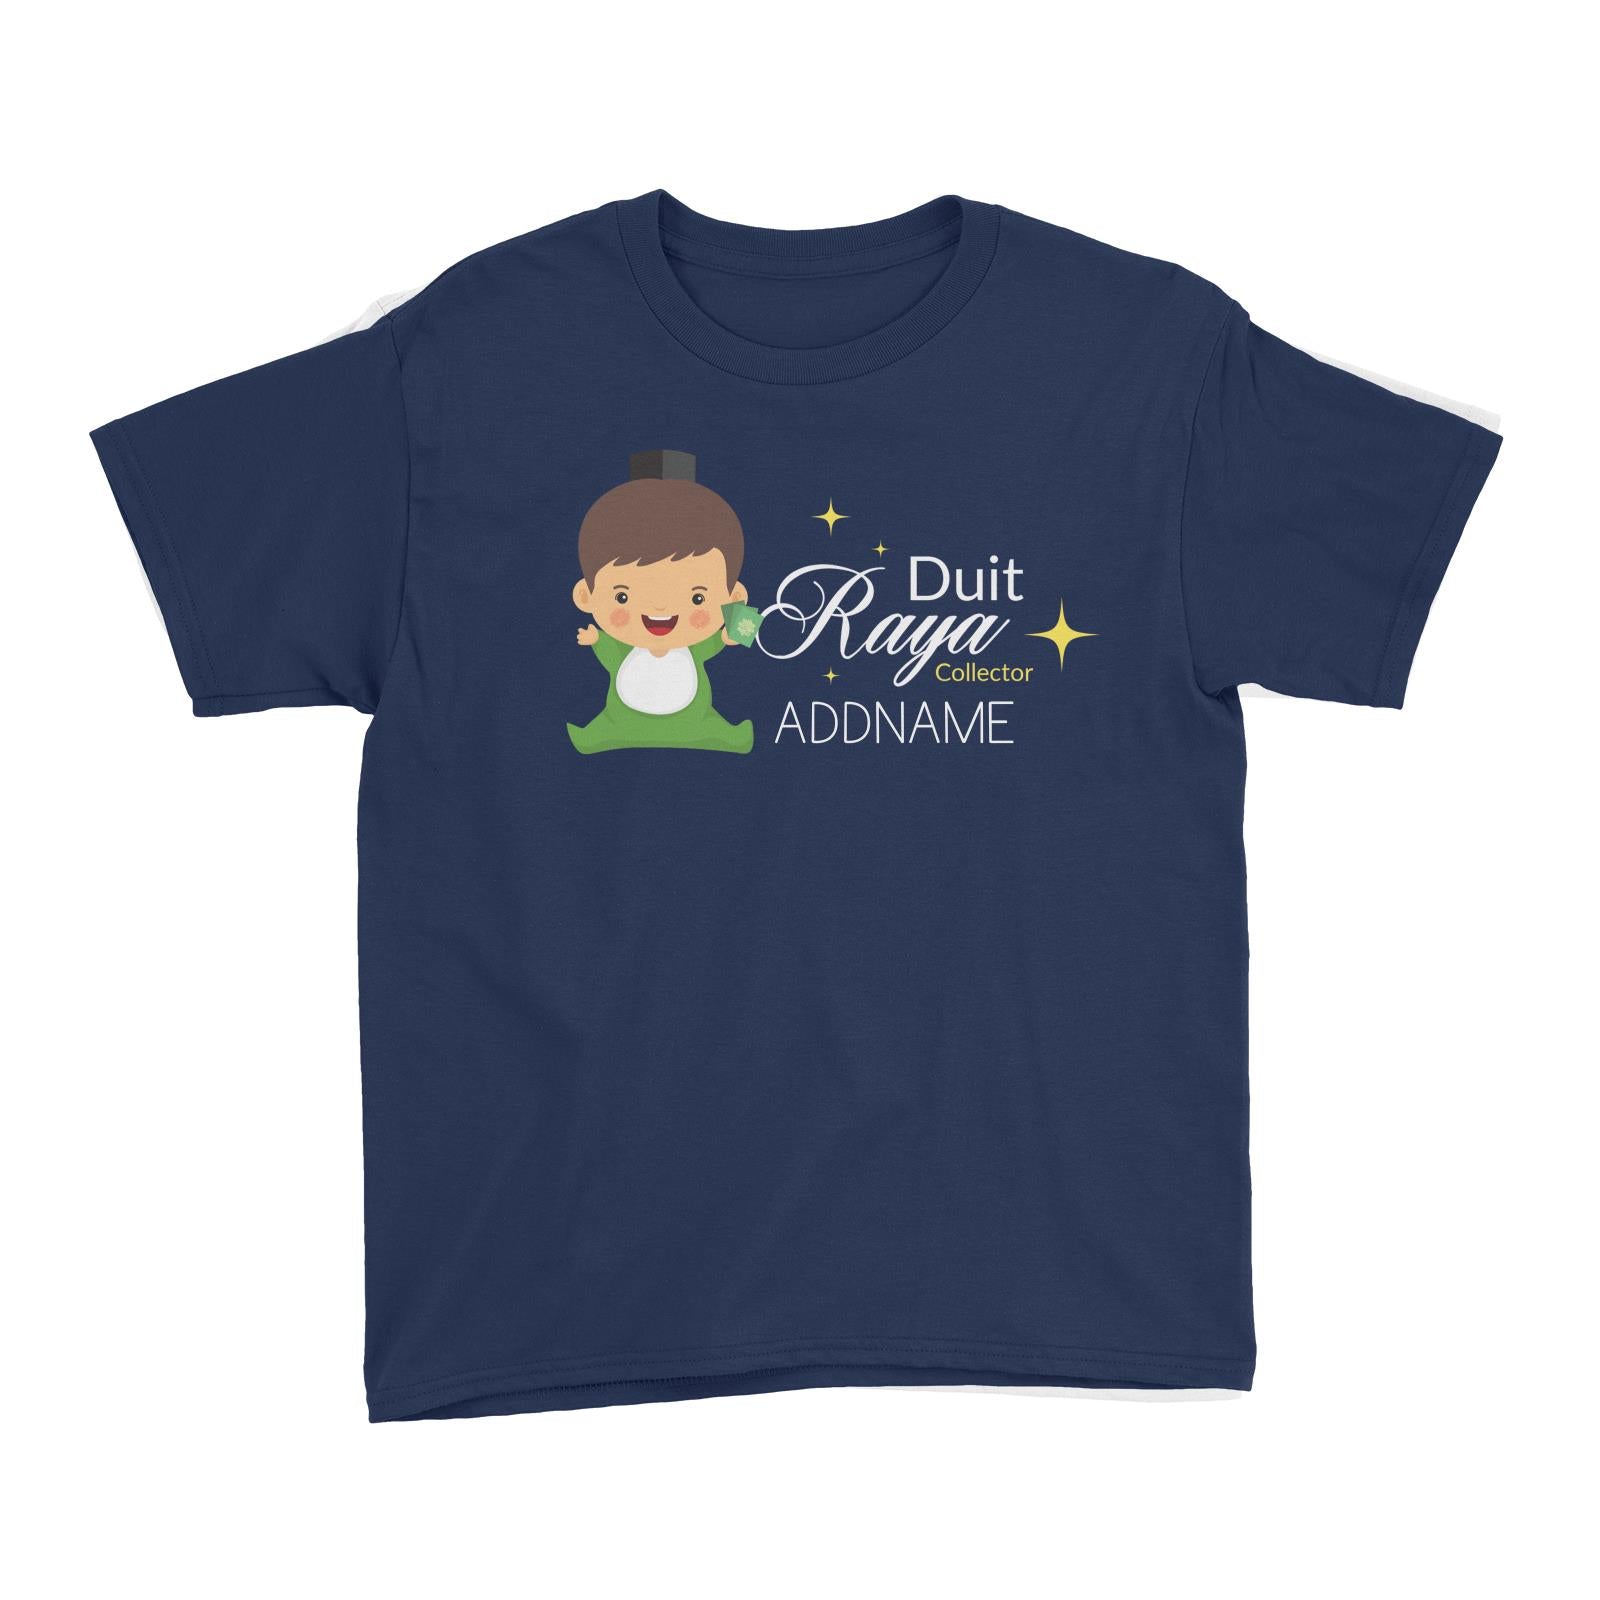 Duit Raya Collector Baby Boy Kid's T-Shirt  Personalizable Designs Sweet Character